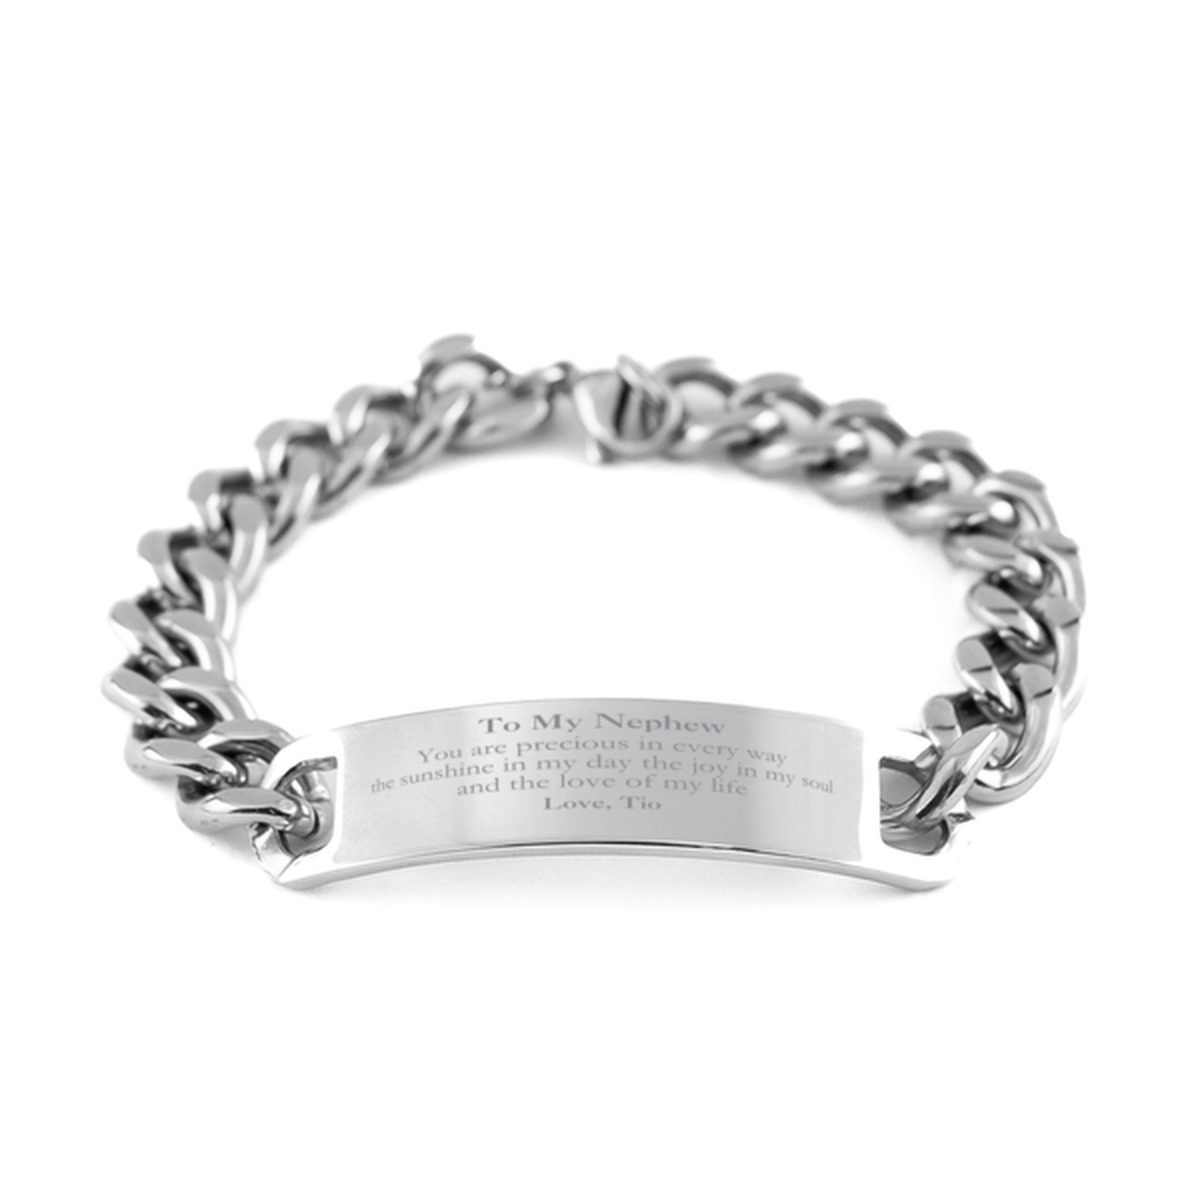 Graduation Gifts for Nephew Cuban Chain Stainless Steel Bracelet Present from Tio, Christmas Nephew Birthday Gifts Nephew You are precious in every way the sunshine in my day. Love, Tio